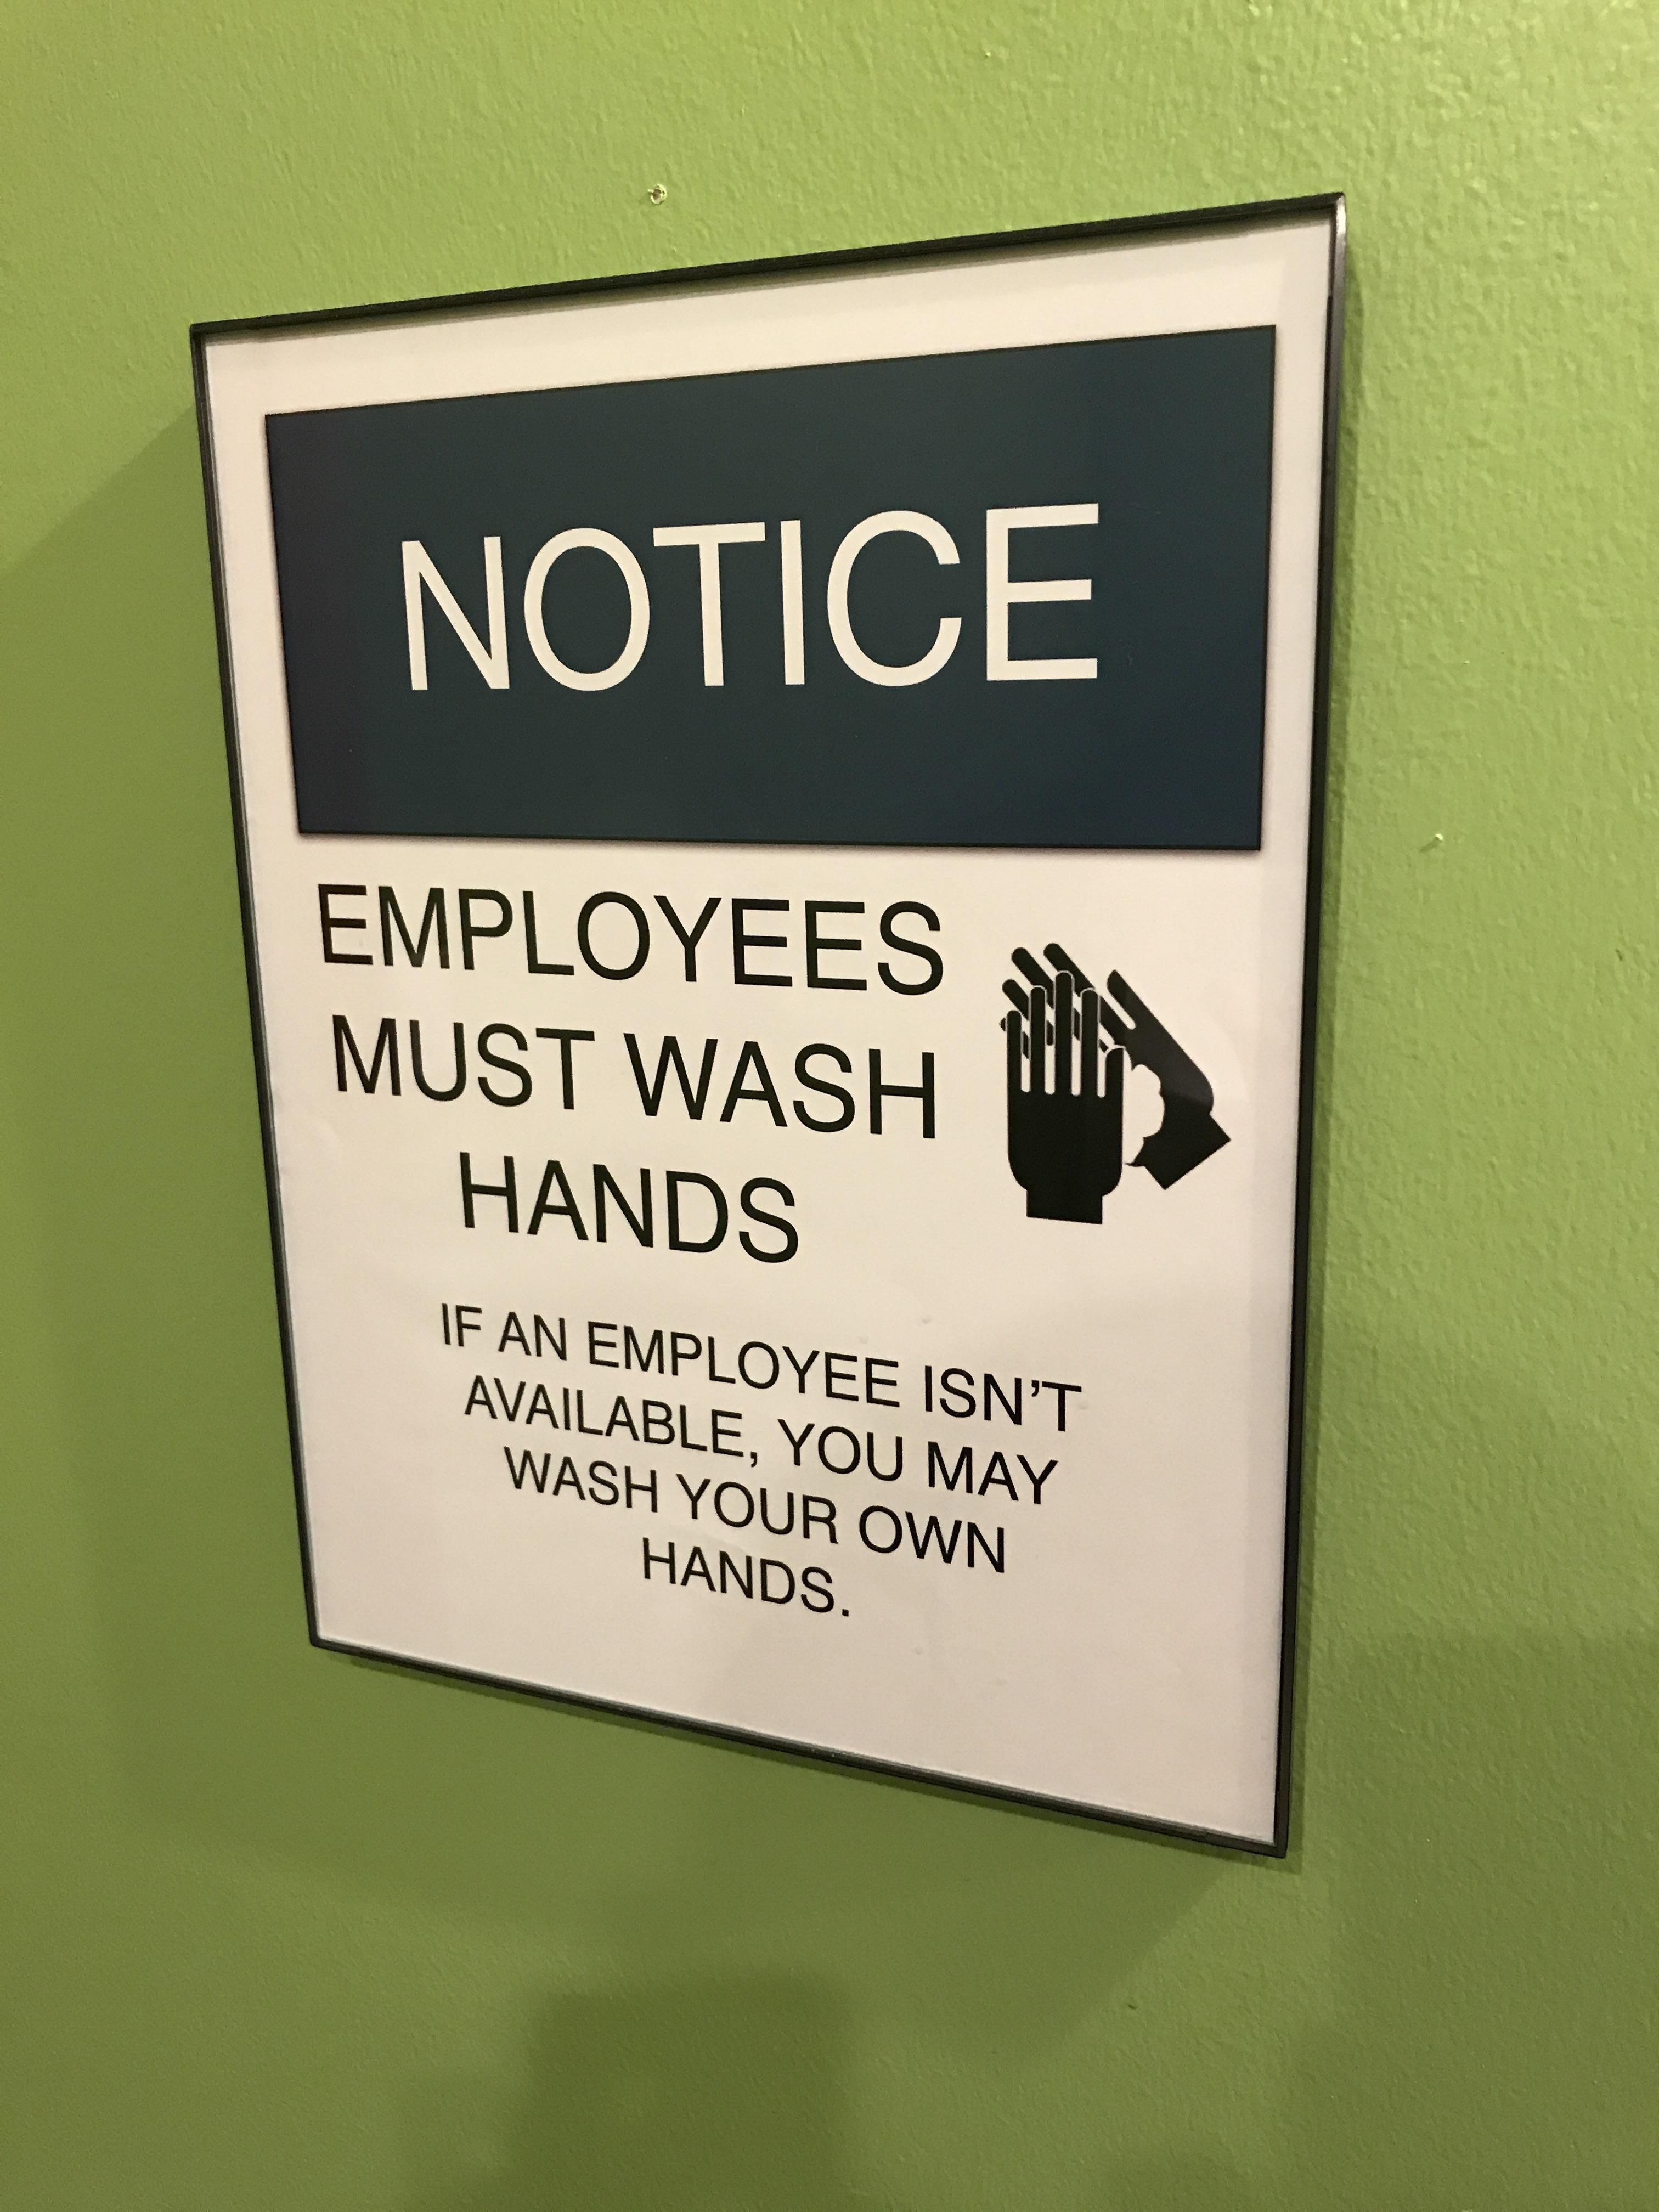 there life after death trespass - Notice Employees Must Wash Hands If An Employee Isn'T Available, You May Wash Your Own Hands